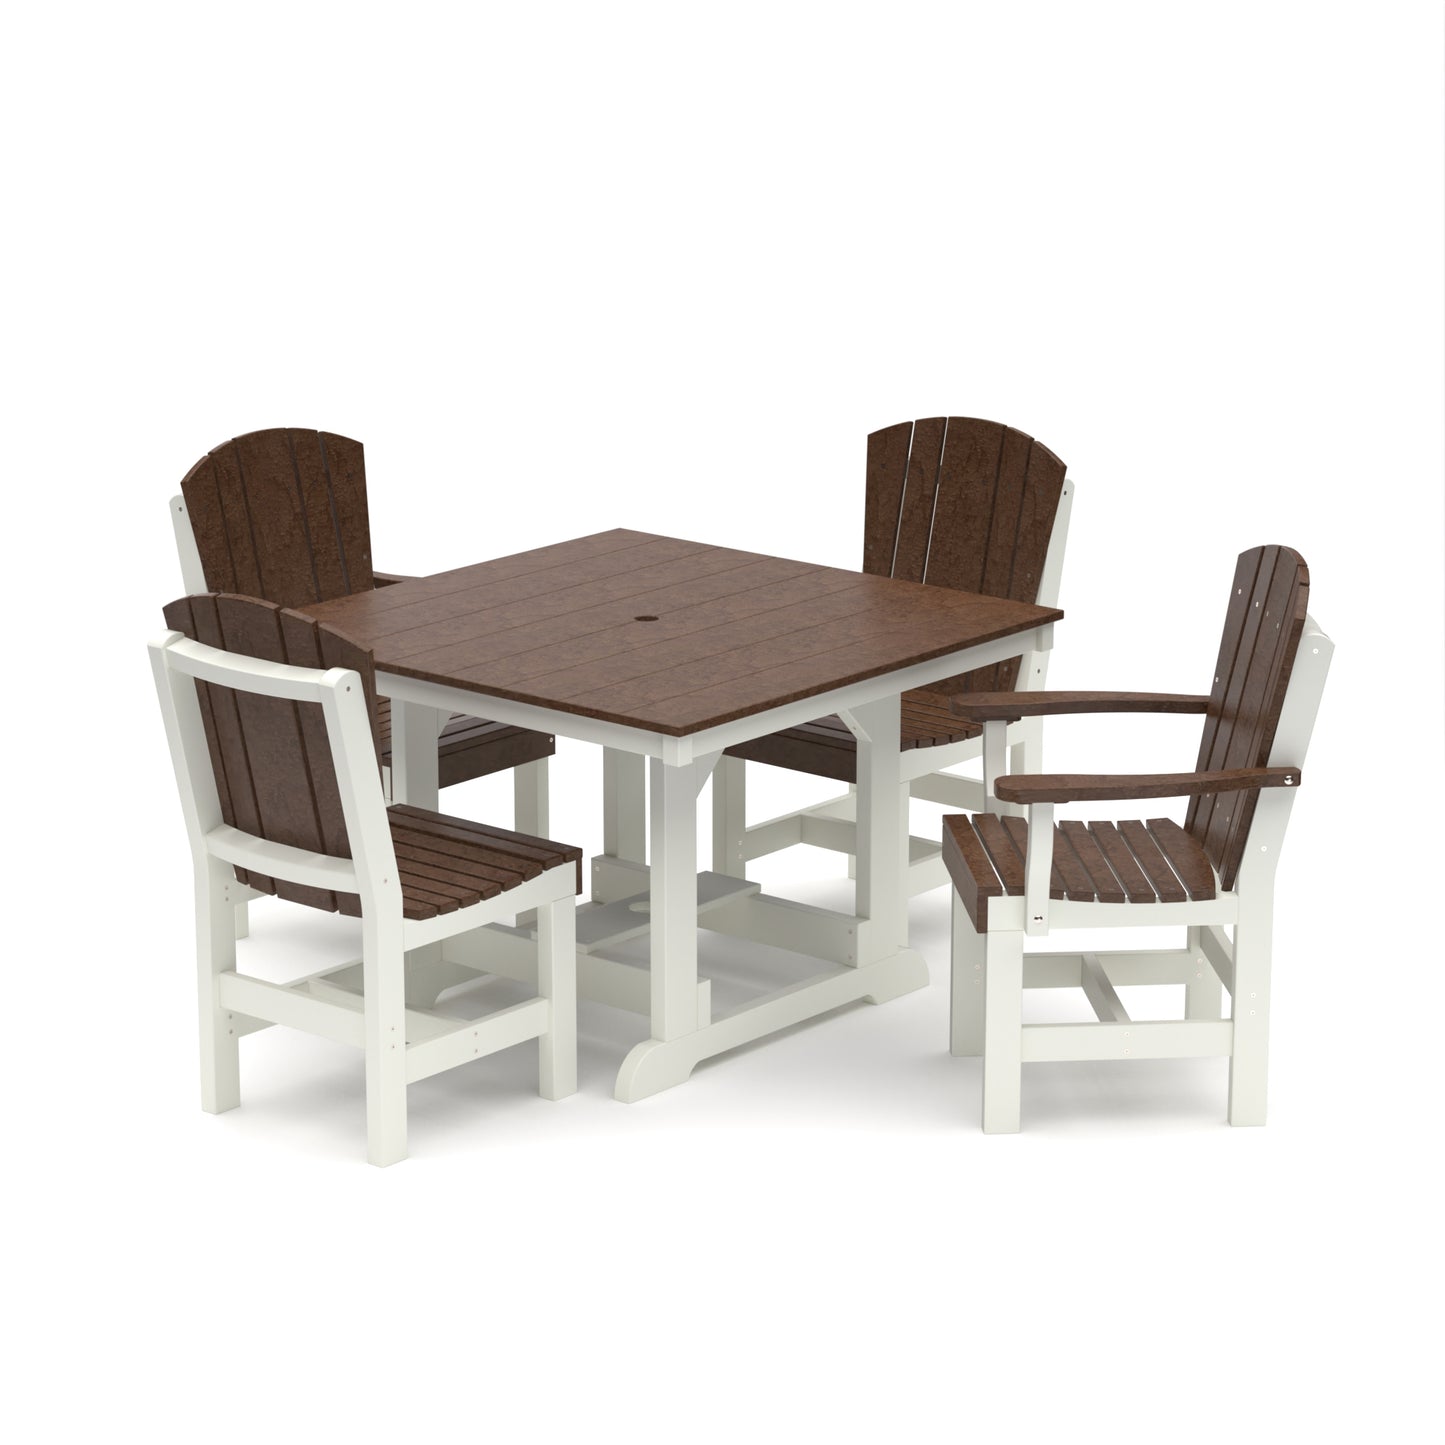 Wildridge Heritage Recycled Plastic 44x44 Table Set with 4 Dining Chairs - LEAD TIME TO SHIP  4 WEEKS